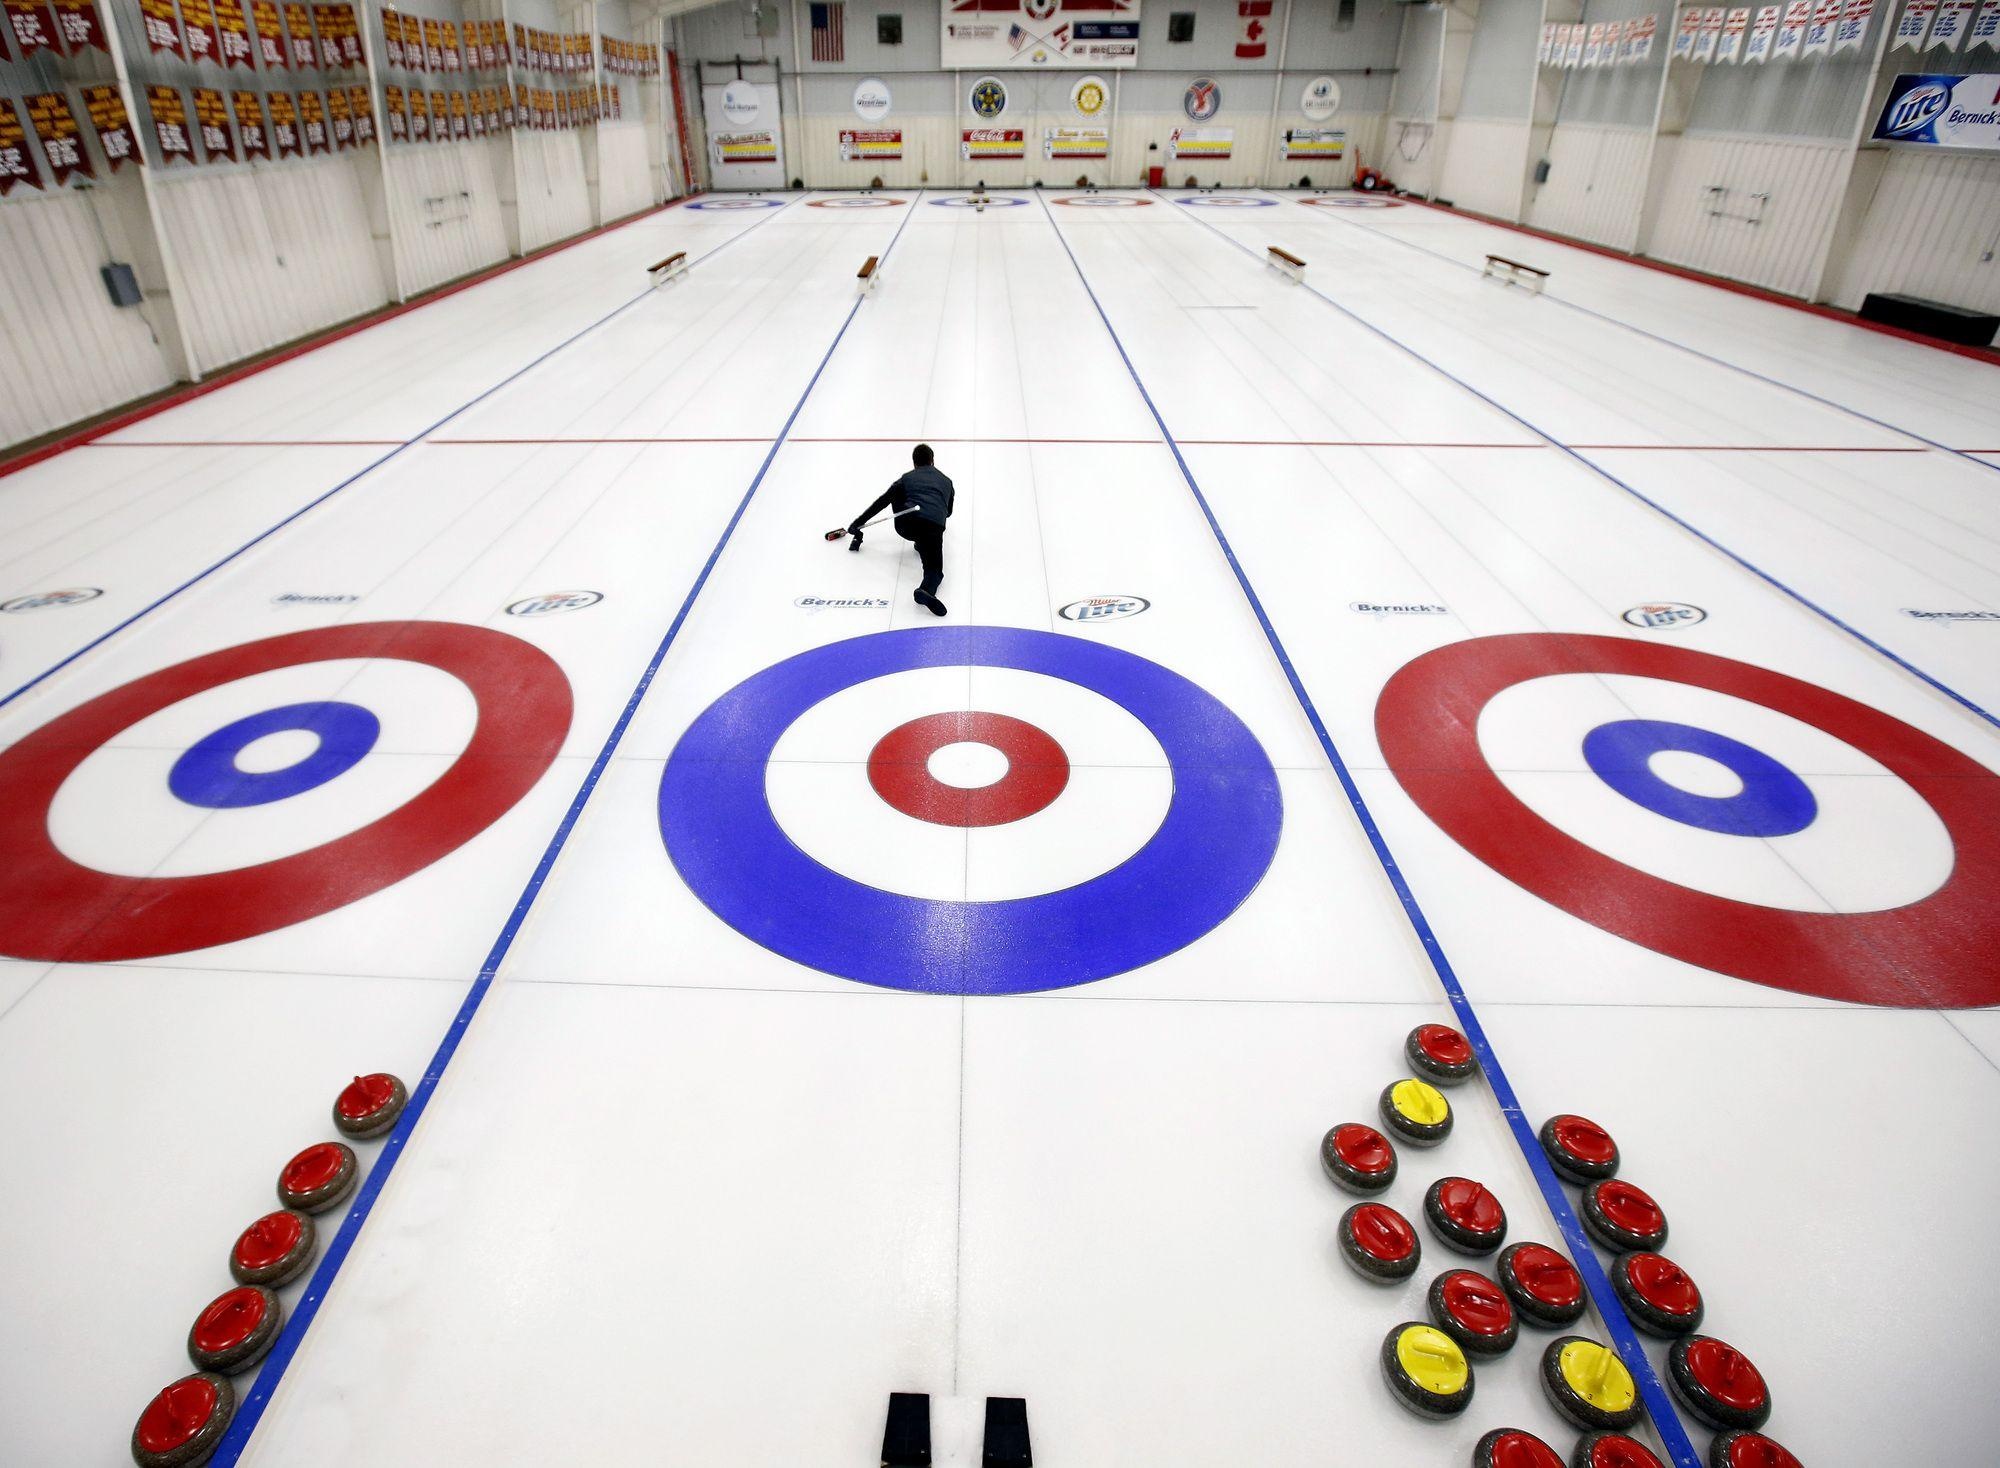 Curling: A sport in which players slide stones on a sheet of ice toward a target area. 2000x1470 HD Background.